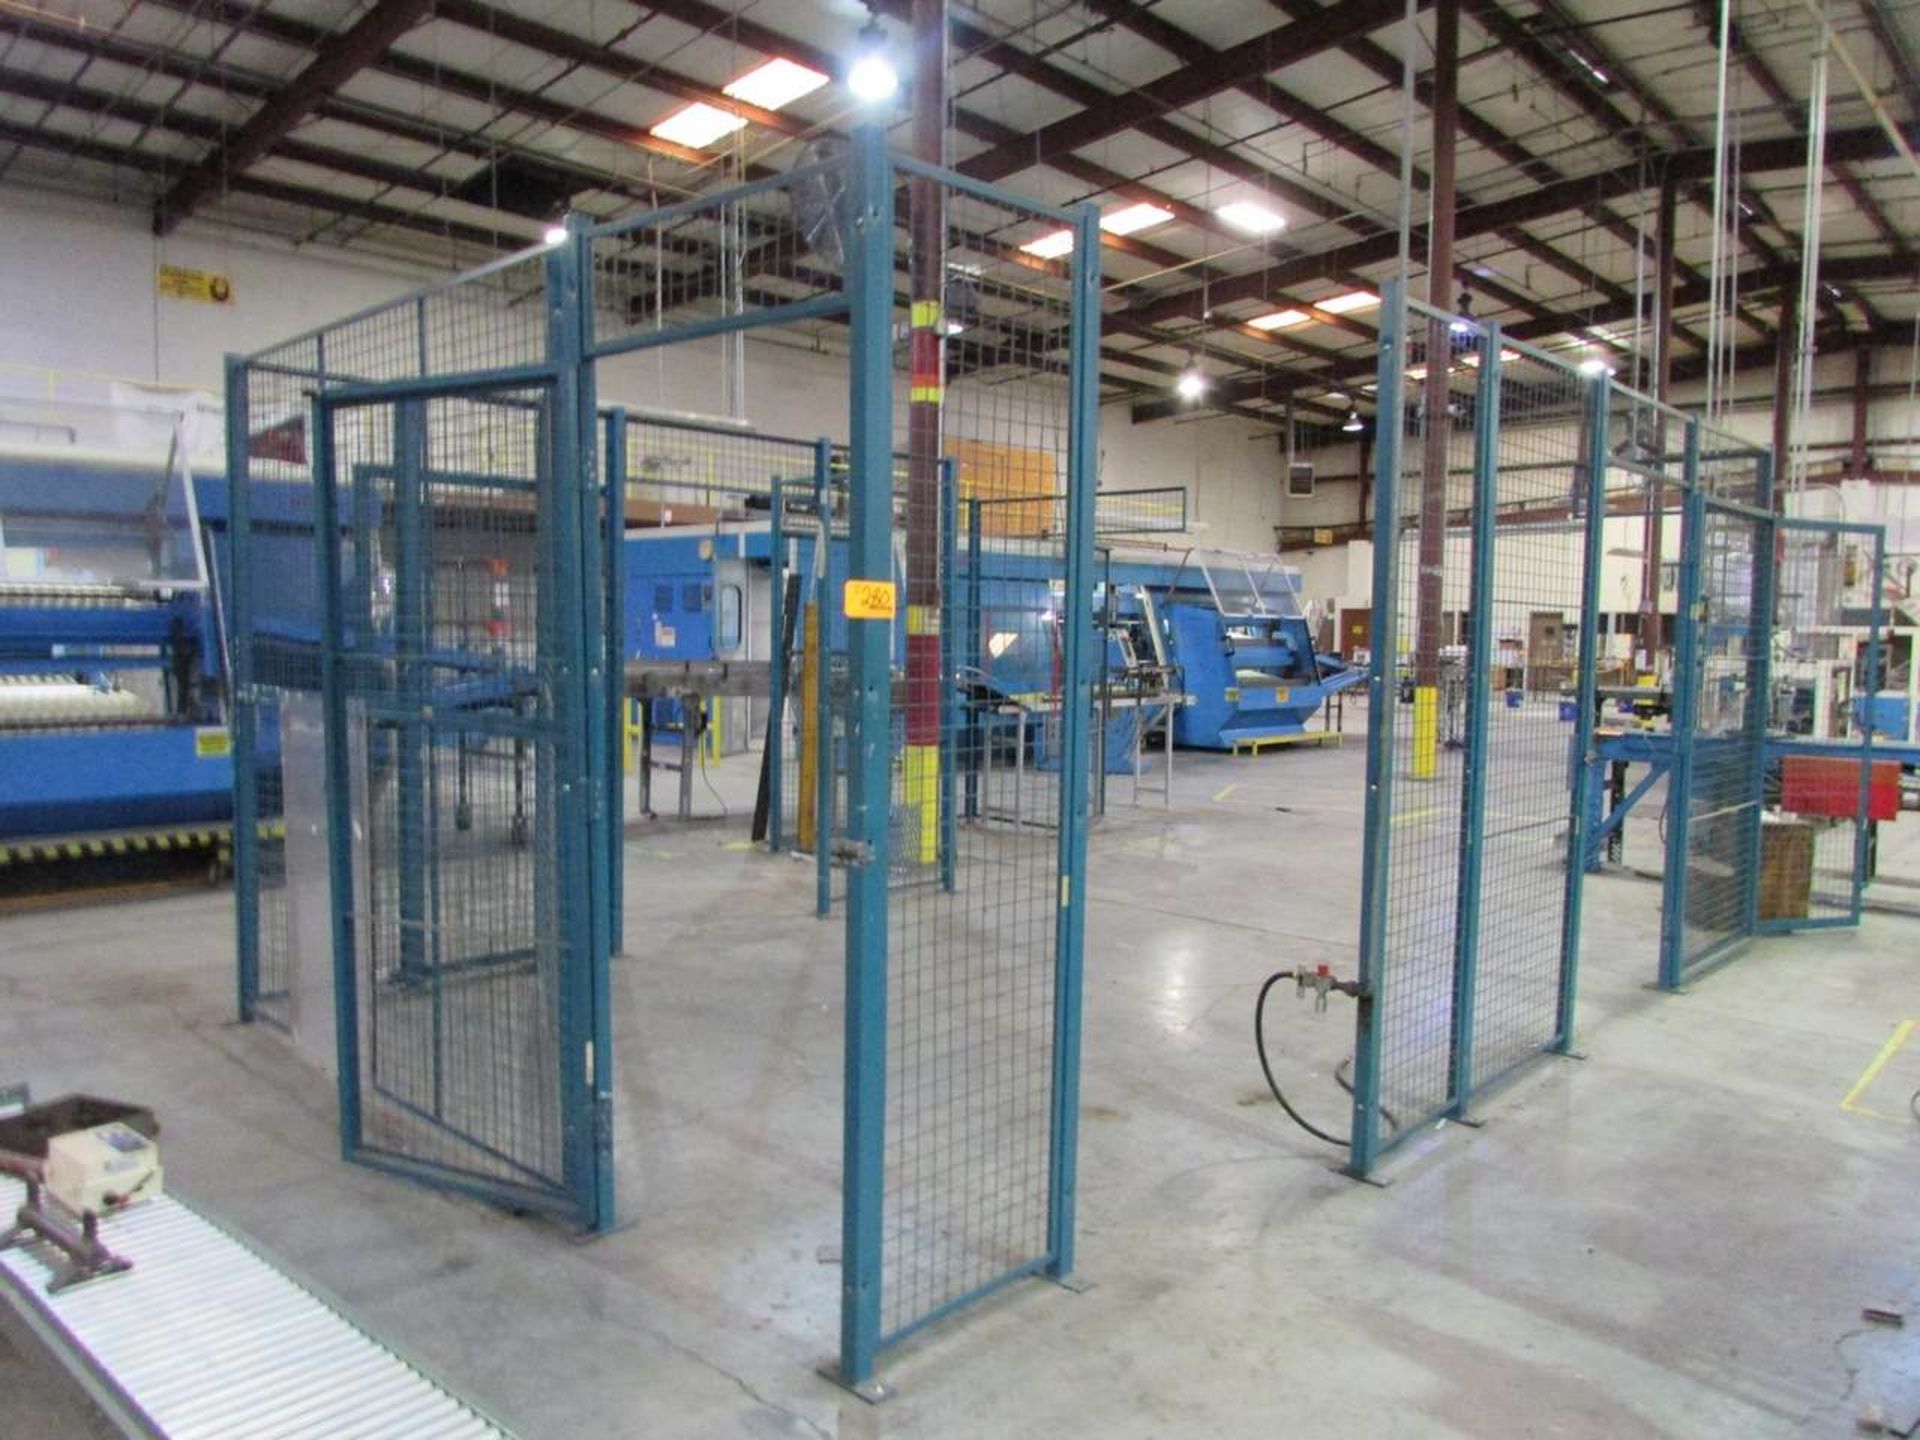 All Machine Guard Rails and Safety Cage - Image 4 of 5